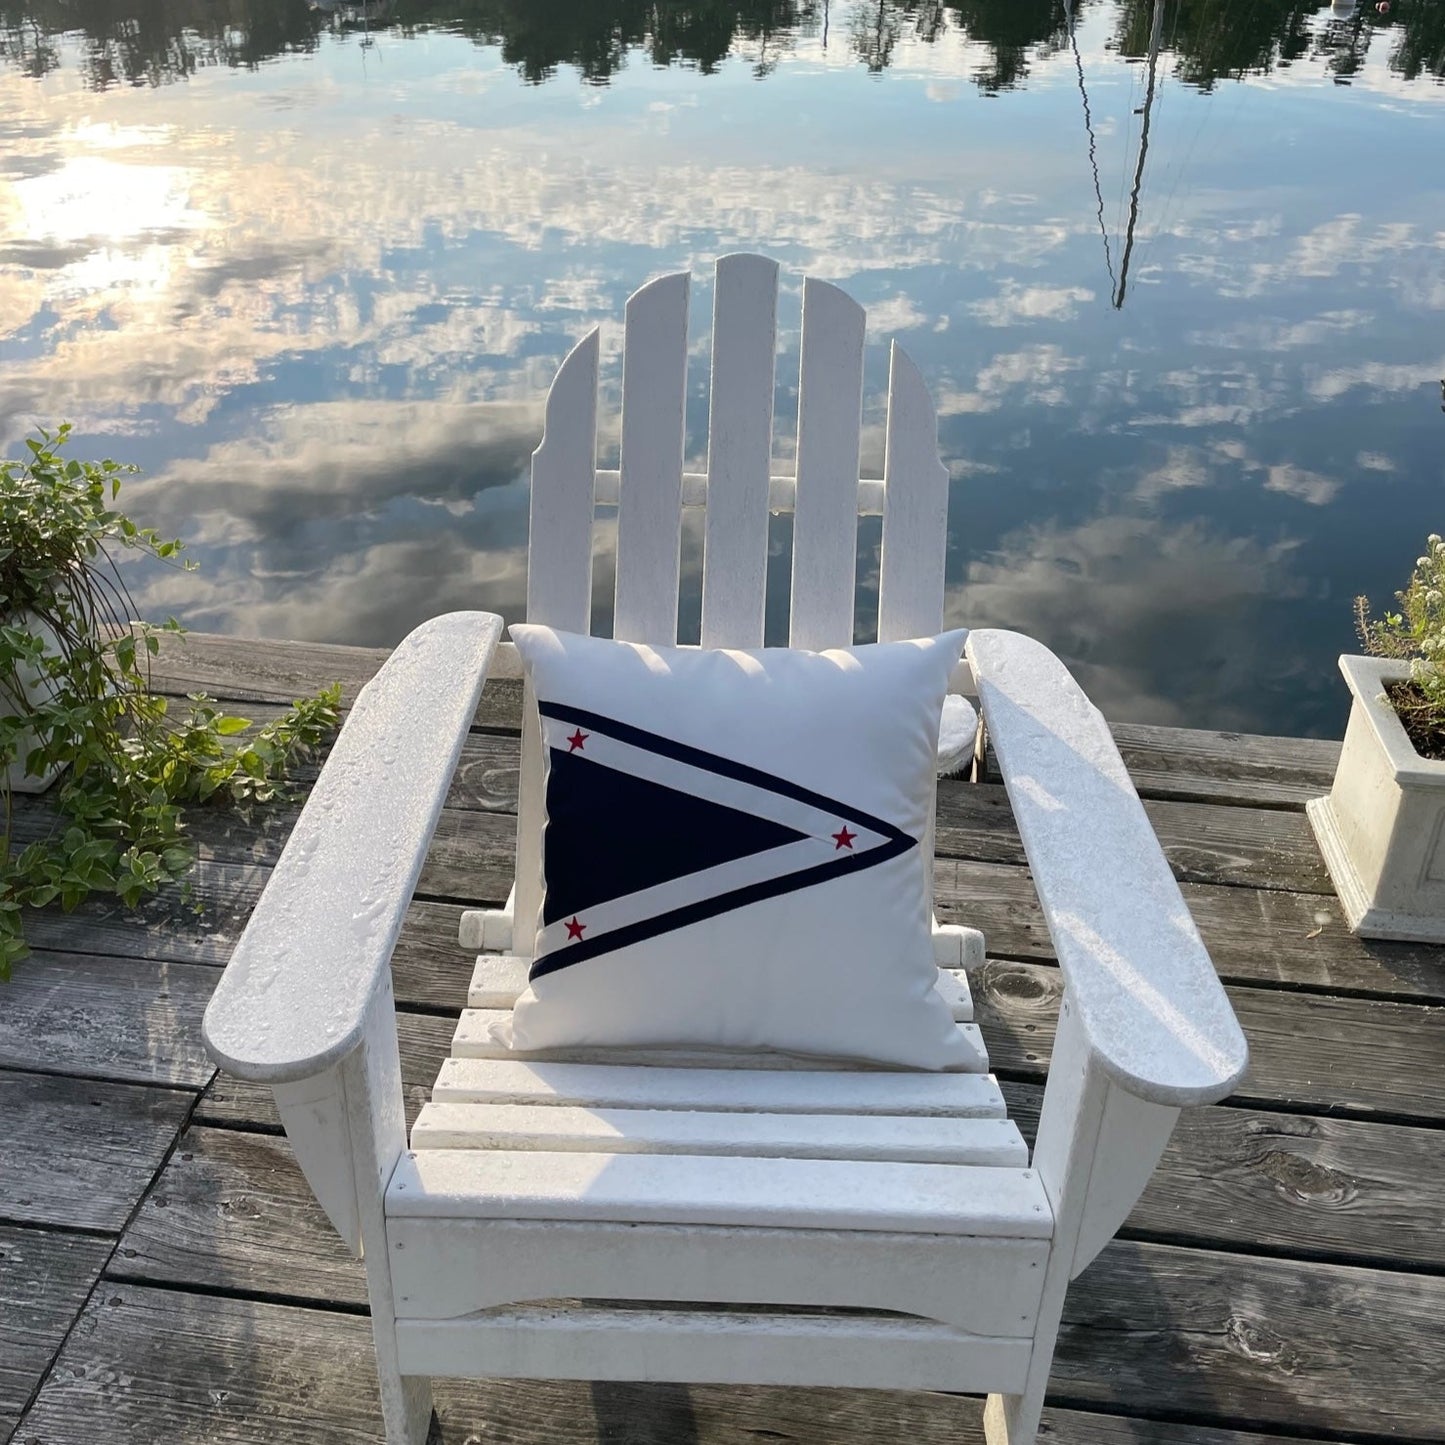 Rockland Yacht Club Pillow